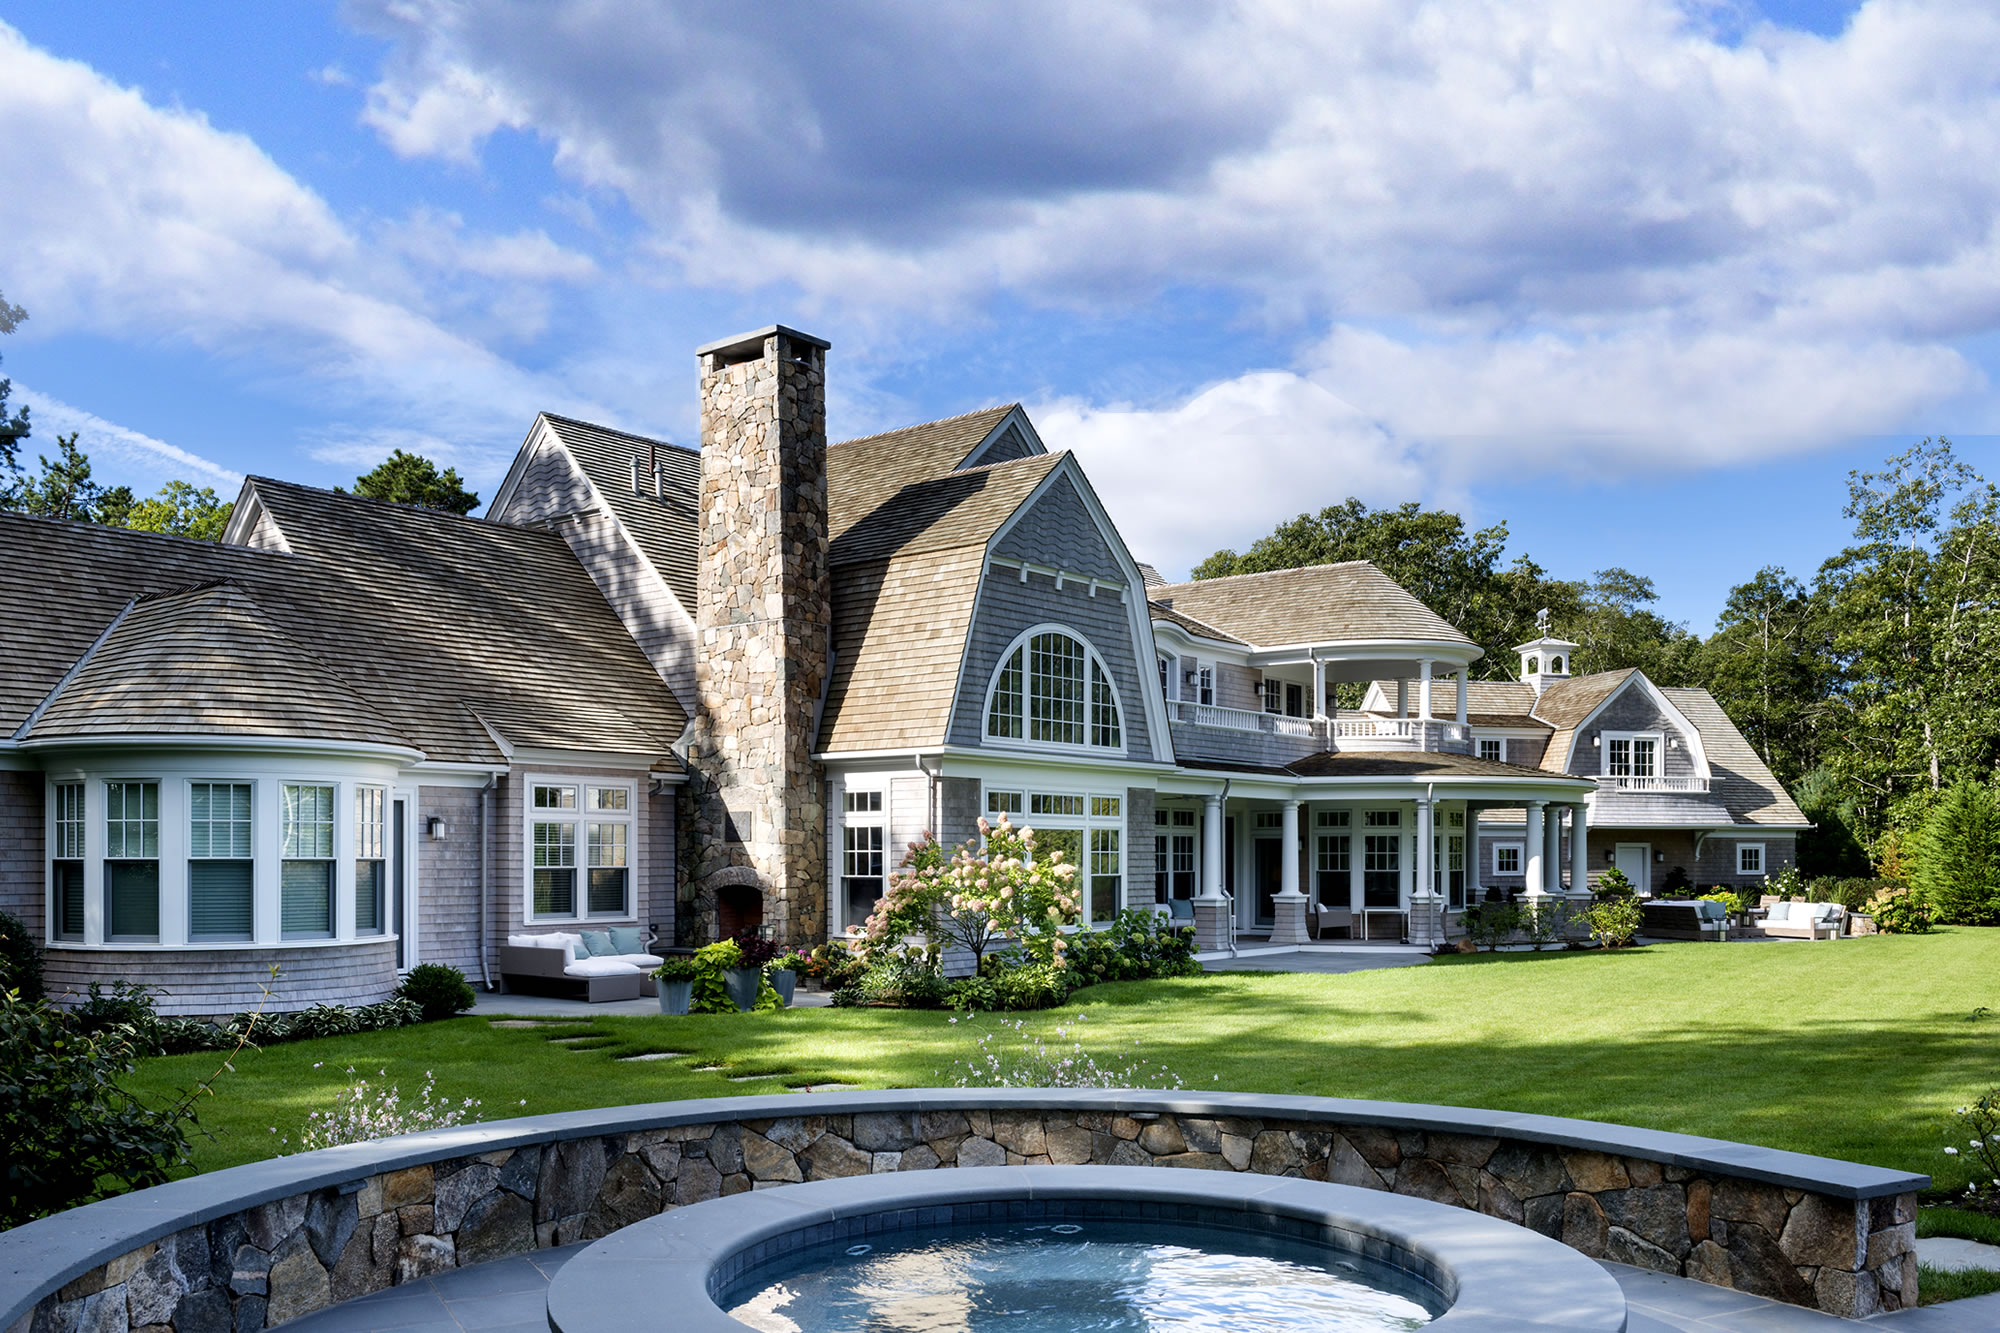 The most reliable and dependable home builder on Cape Cod.